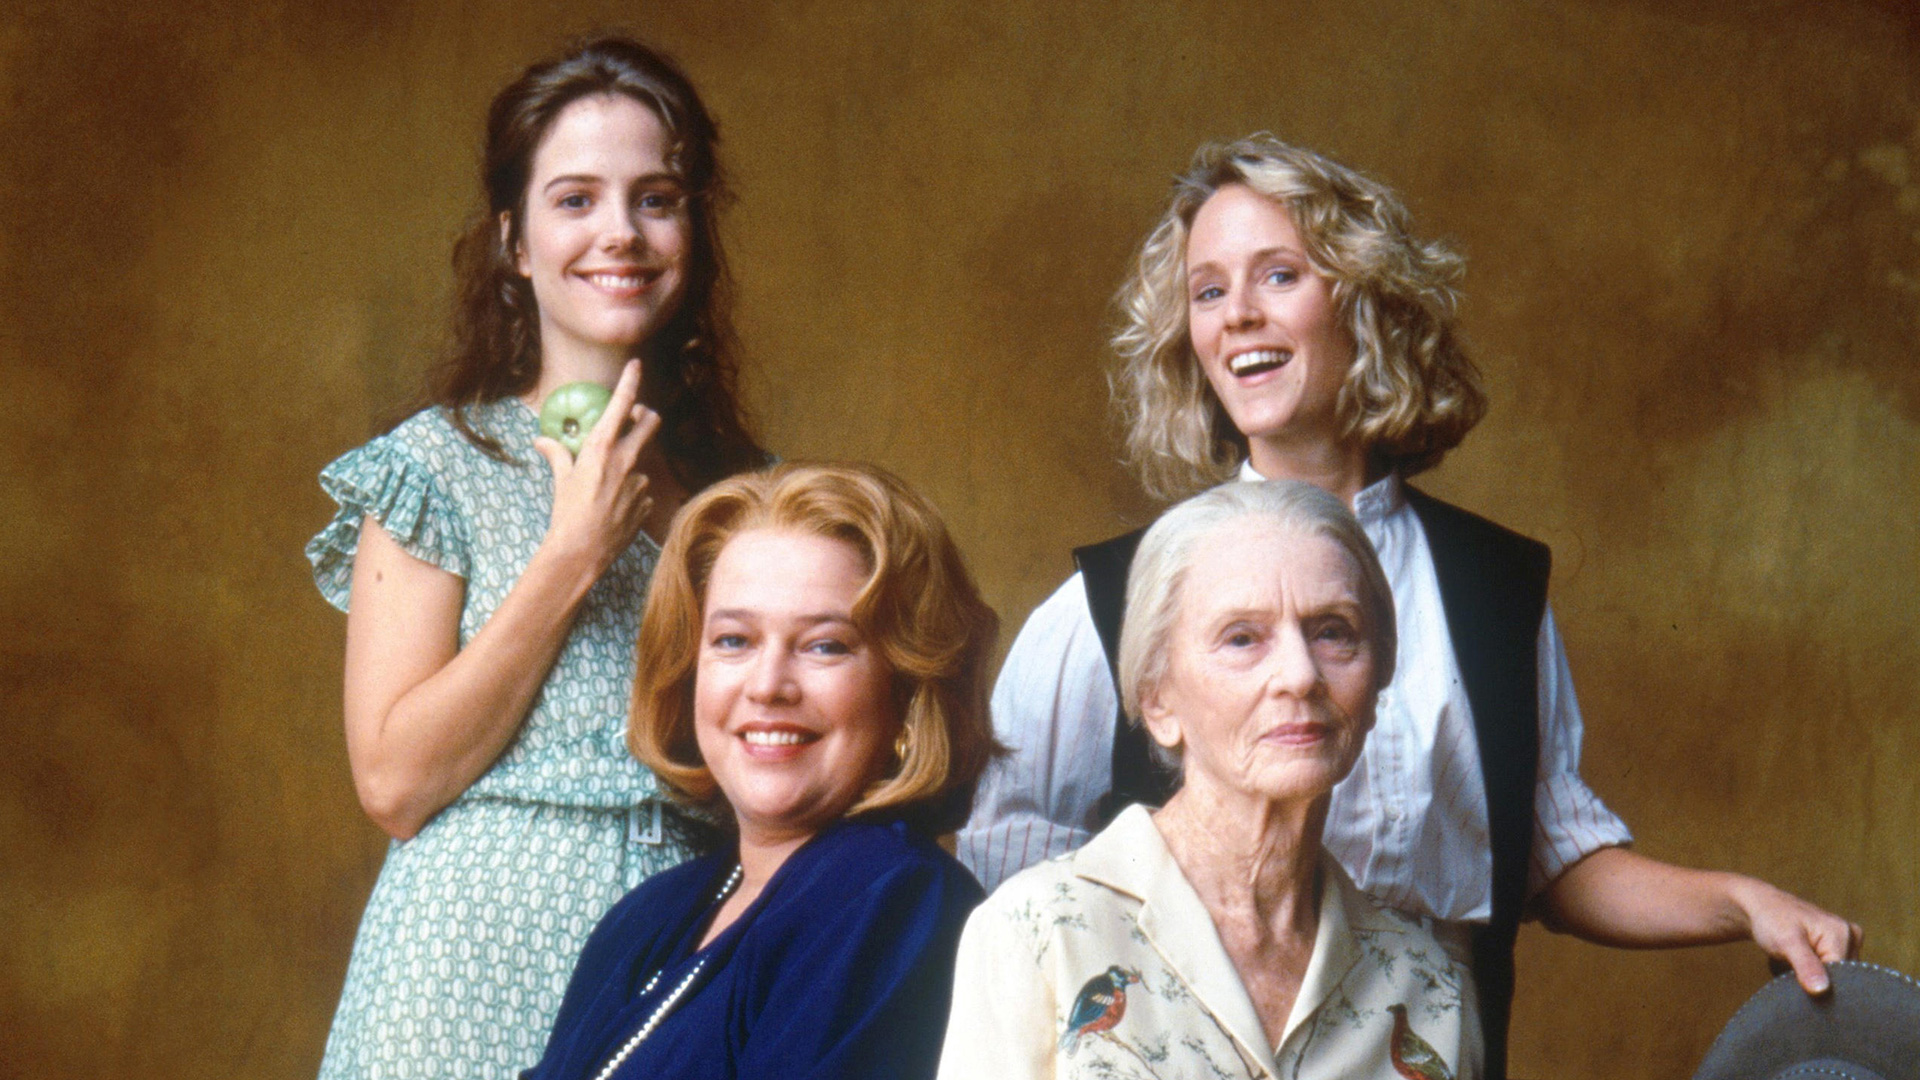 December 27, 1991: “Fried Green Tomatoes” Was Released and Showed Strong Leading Women Like Never Before